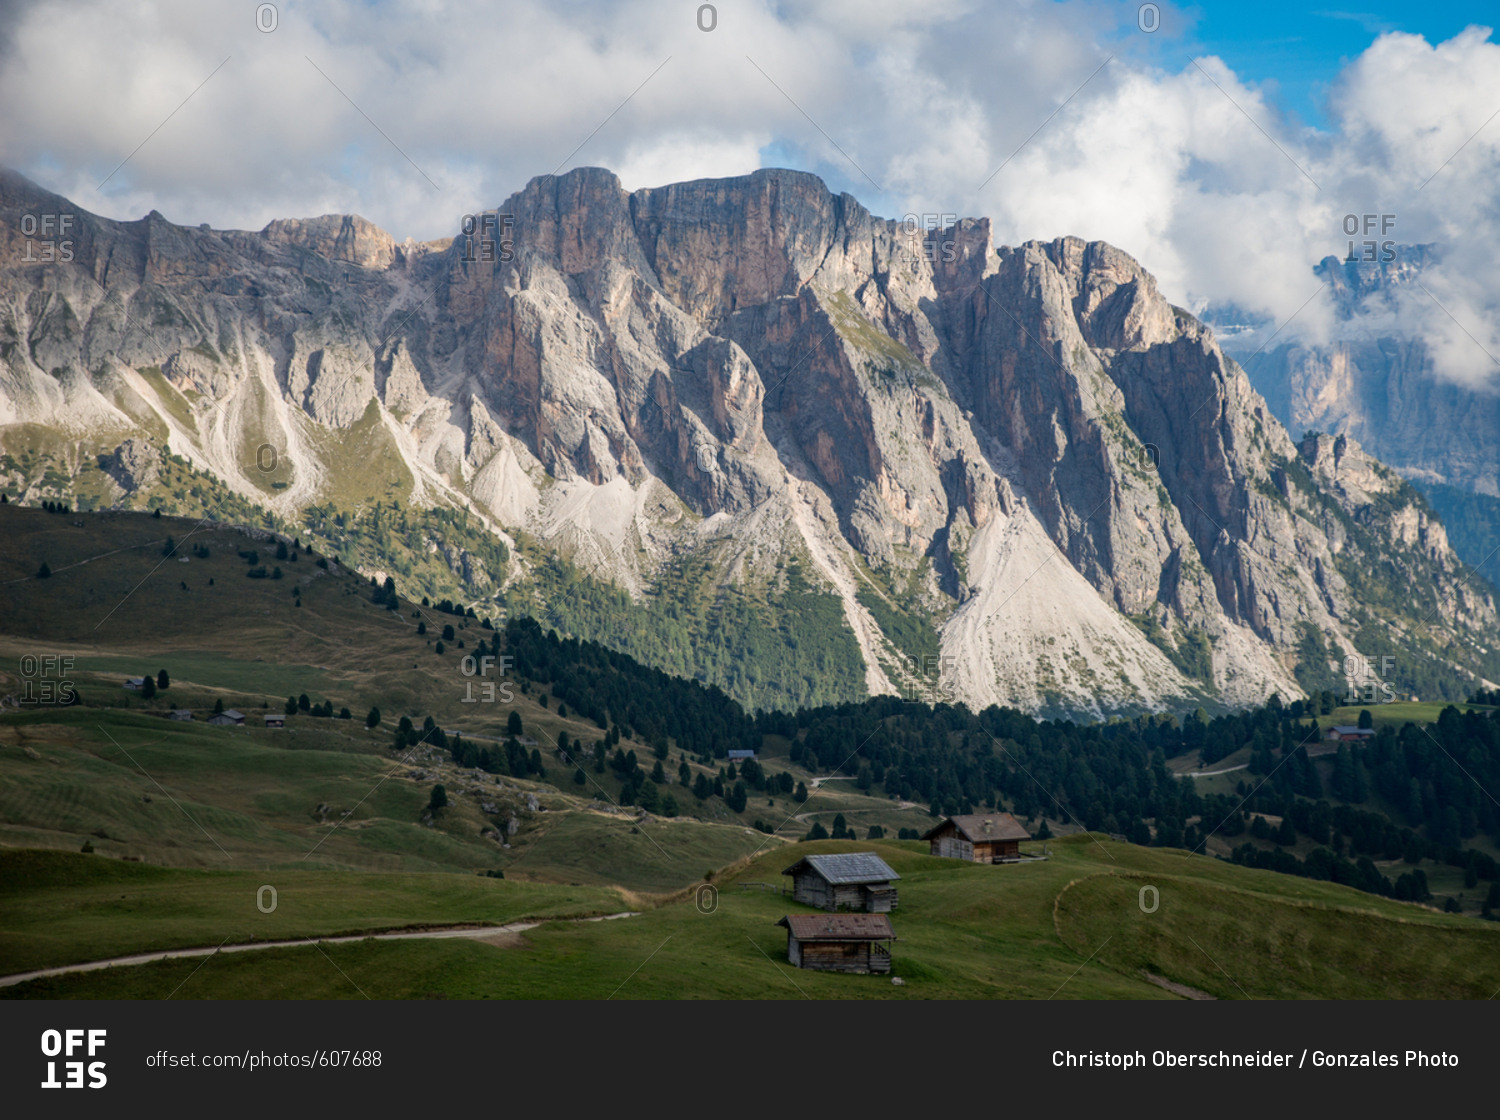 Italy, Val Gardena - September 12, 2015: The landscape is breathtaking at the Val Gardena in Southern Tyrol in Italy. The mountain range and rocky landscape are part of the Dolomites, which are also known as the Southern Limestone Alps